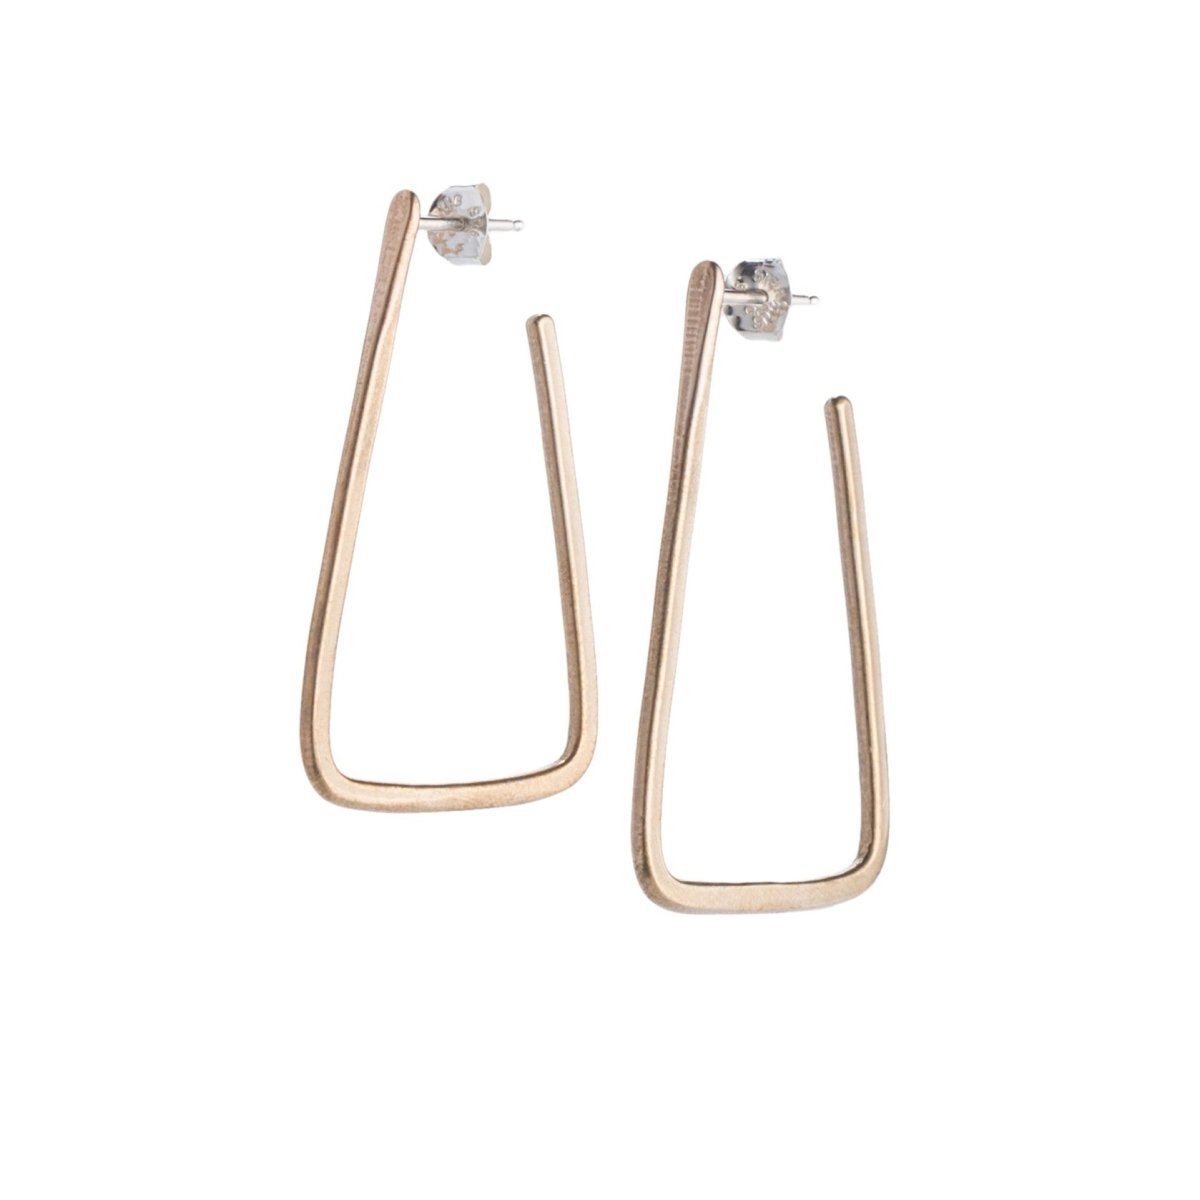 Simple, geometric, bronze hoop earrings with curved edges and a matte finish, sterling silver earrings posts, and sterling silver butterfly earring backings. Hand-crafted in Portland, Oregon. 